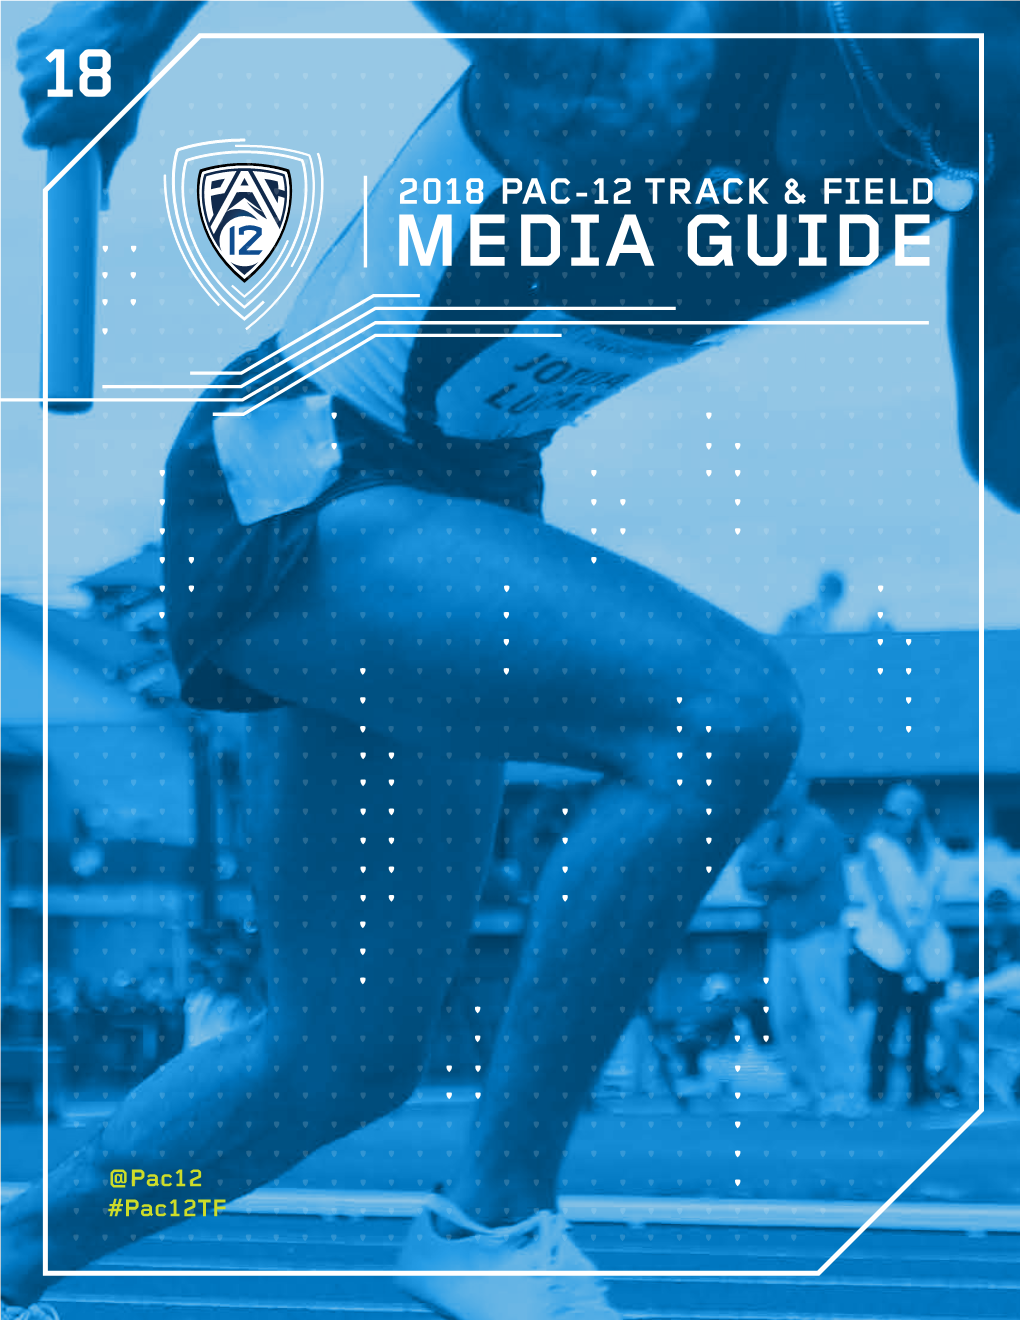 Pac-12 Media Guide